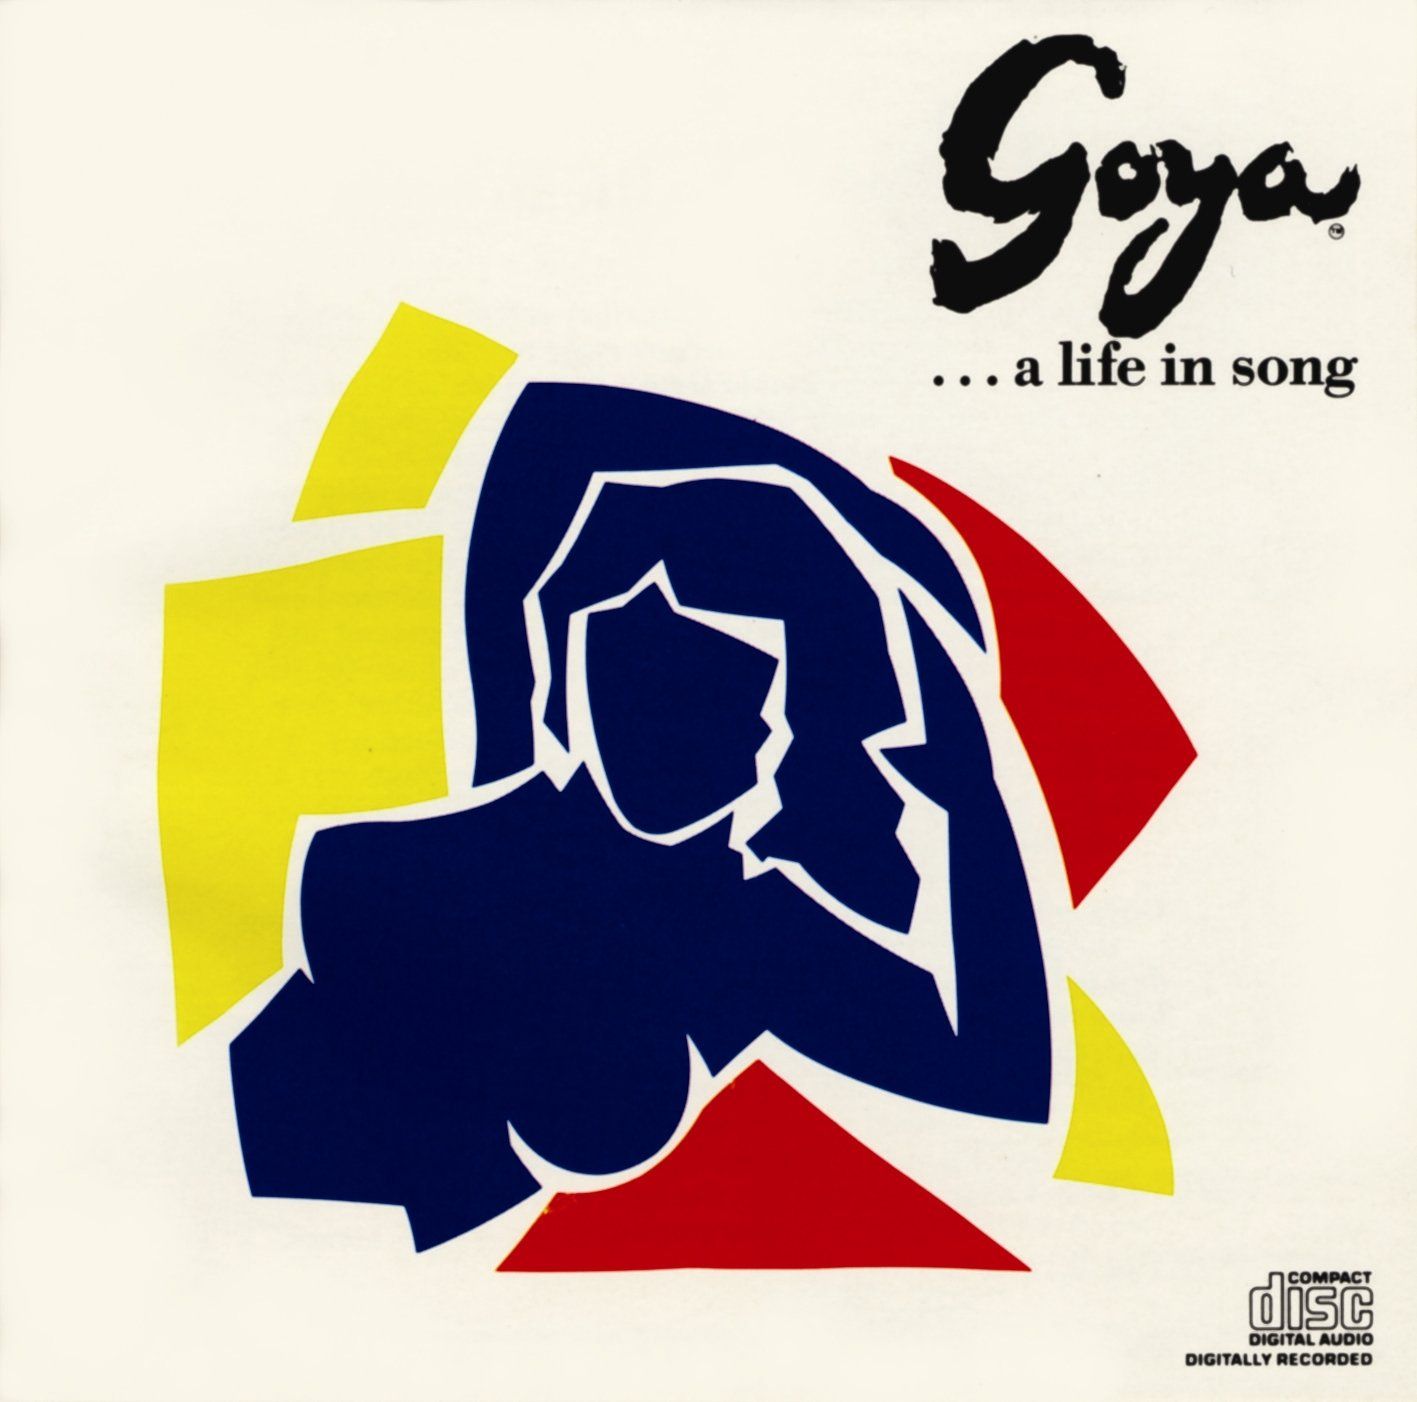 Columbia Records’ album: Goya ... a life in song.